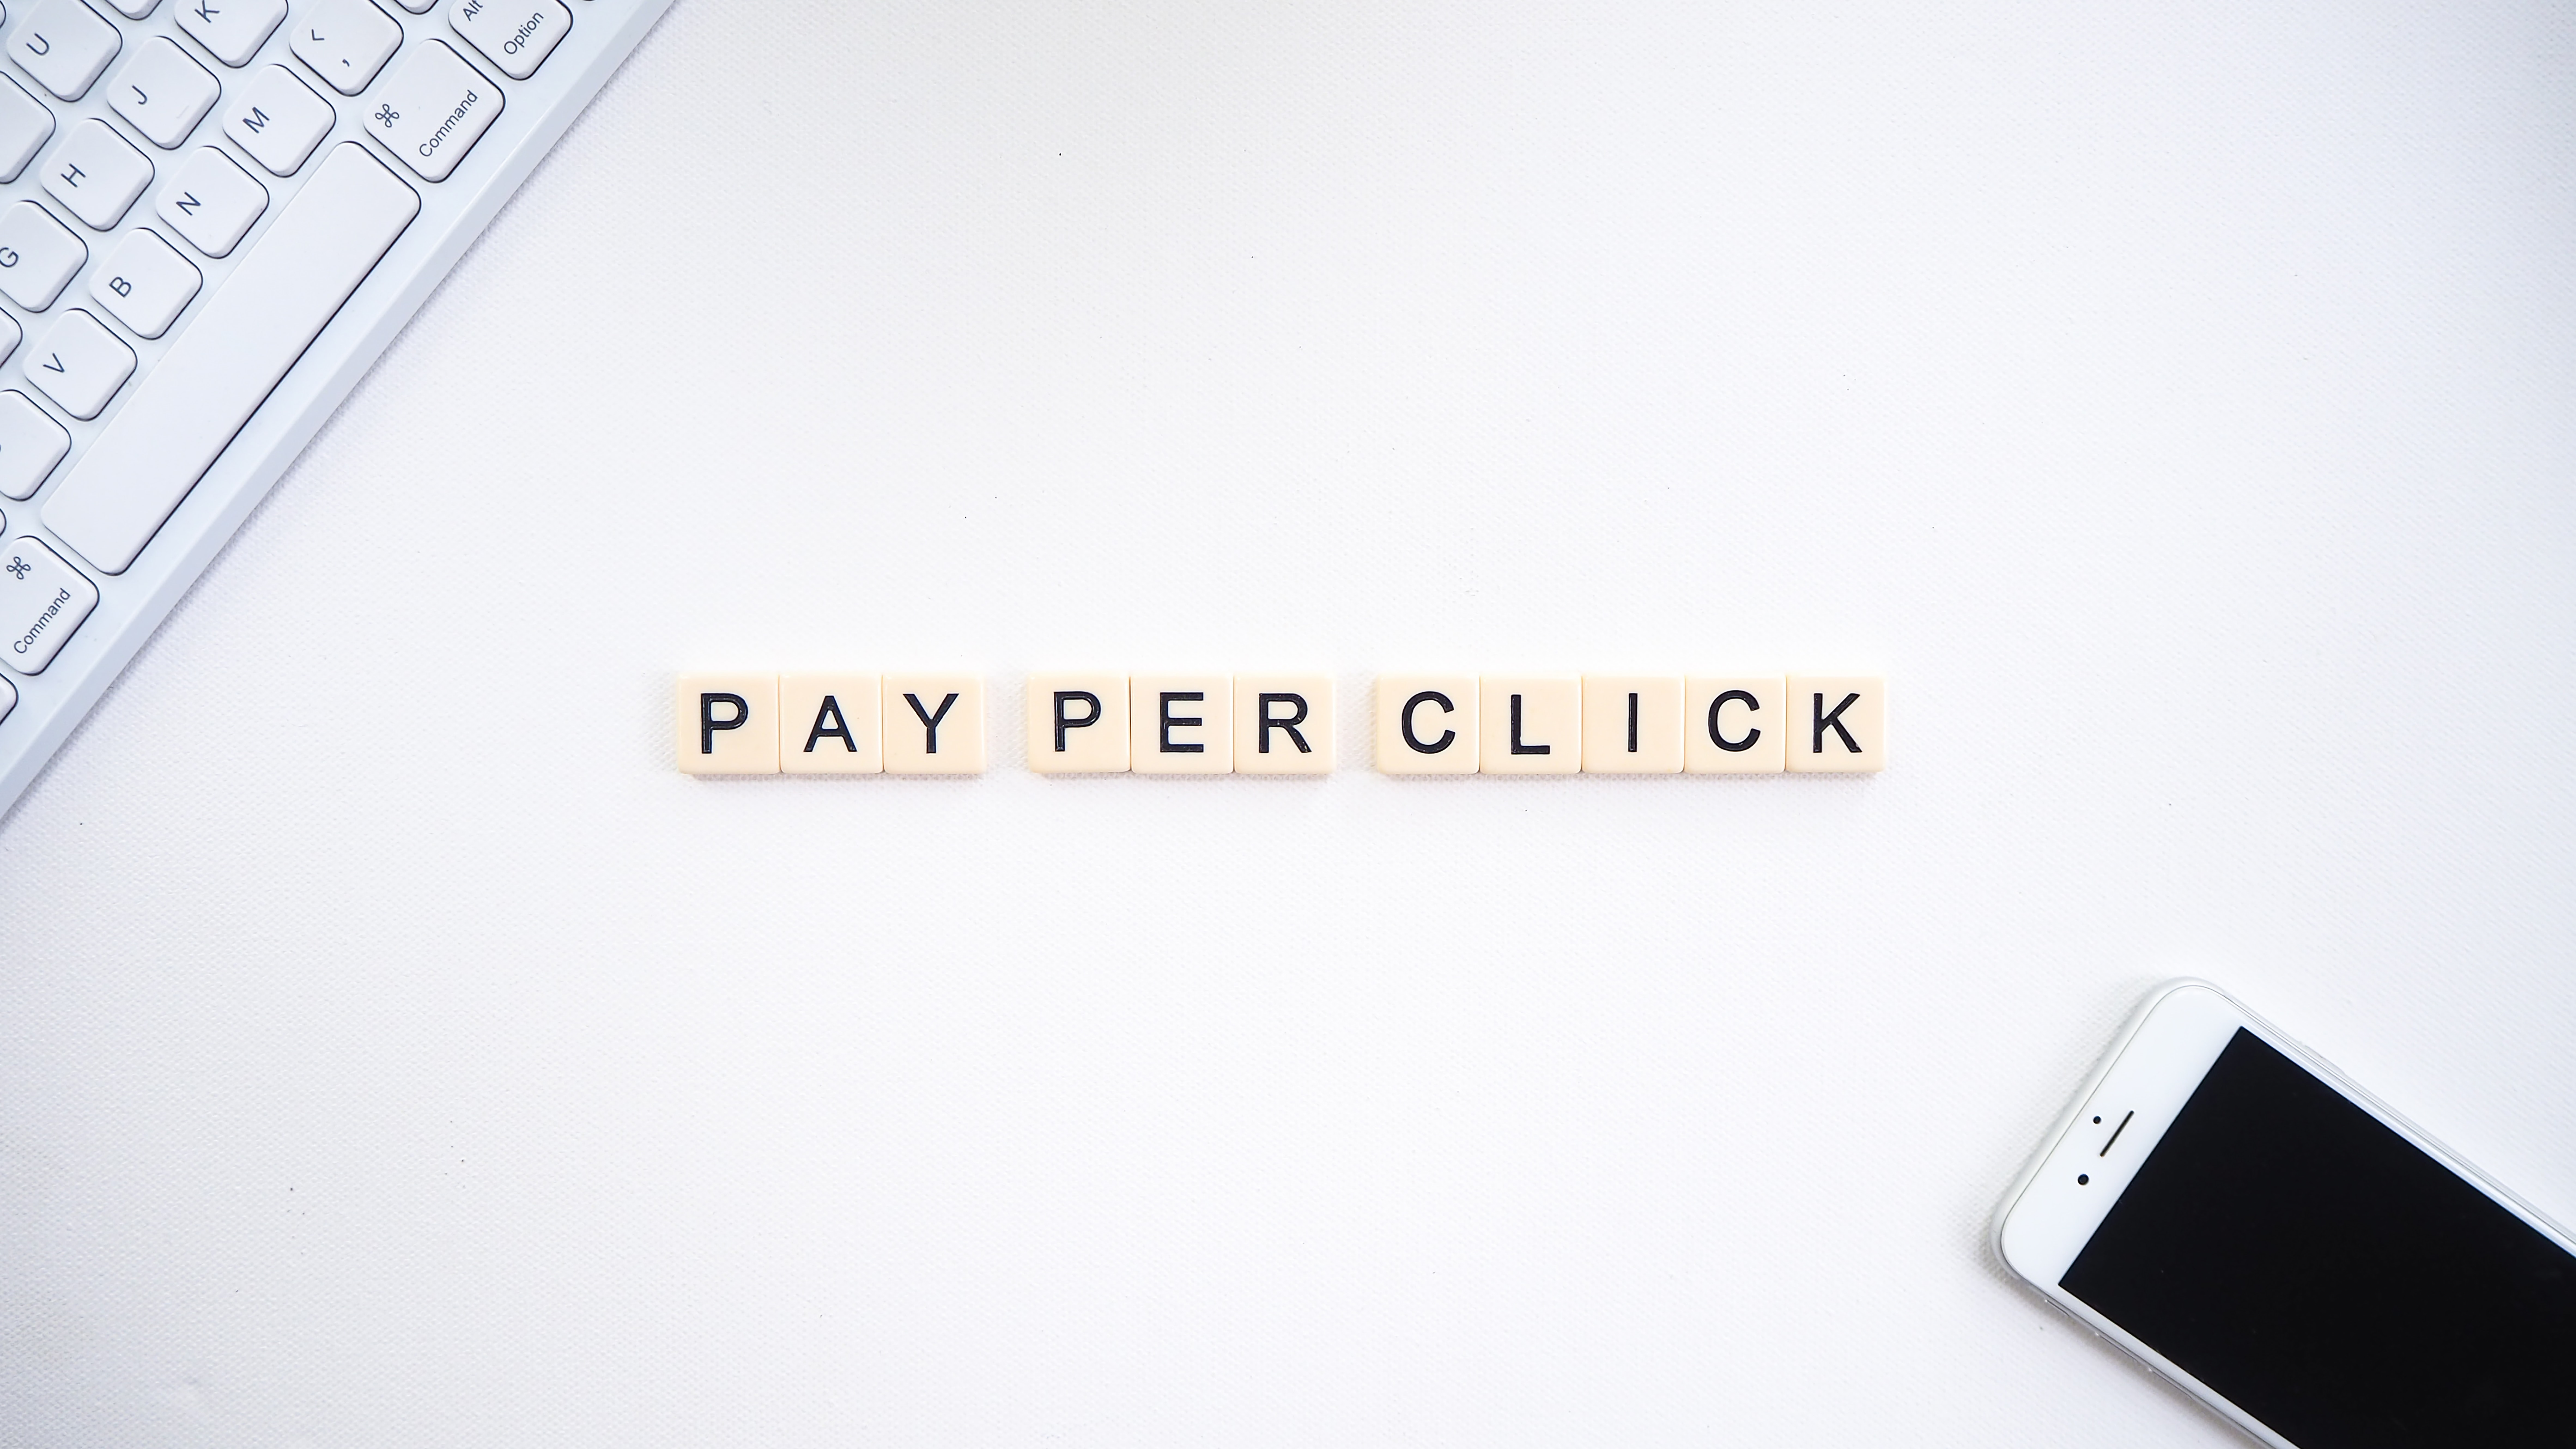 letter-tiles-spelling-out-the-words-pay-per-click-for-advertisements